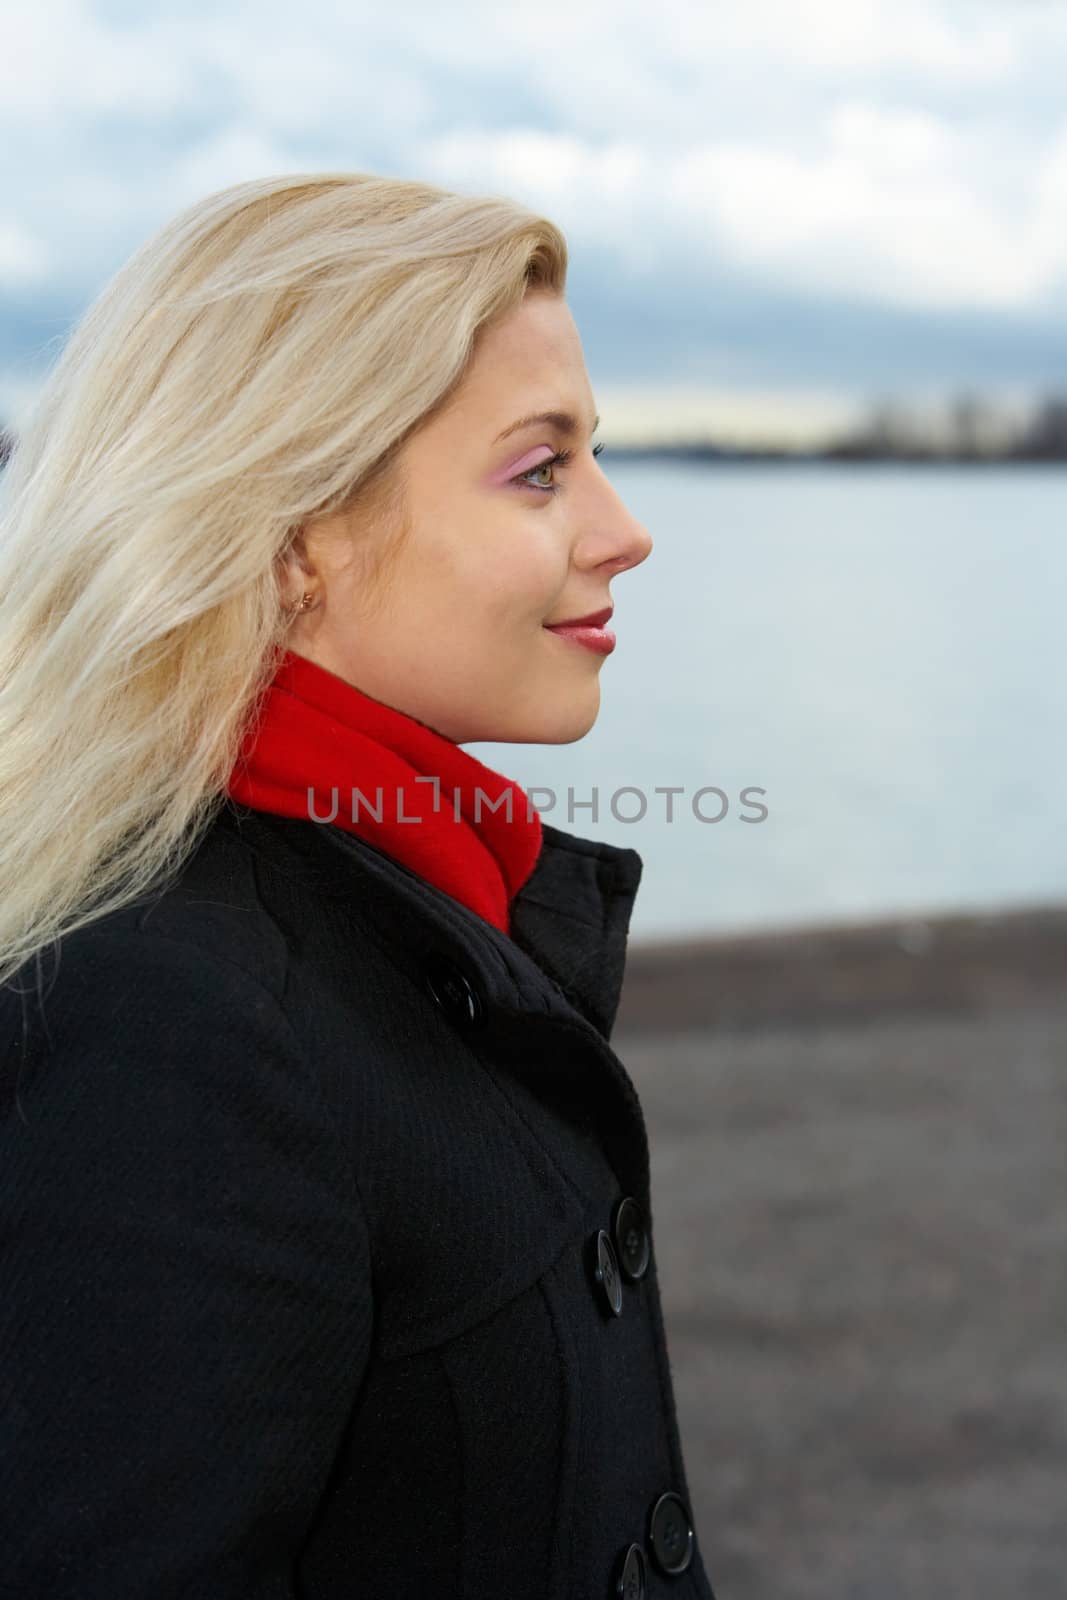 Young woman contemplating outdoors, side profile 